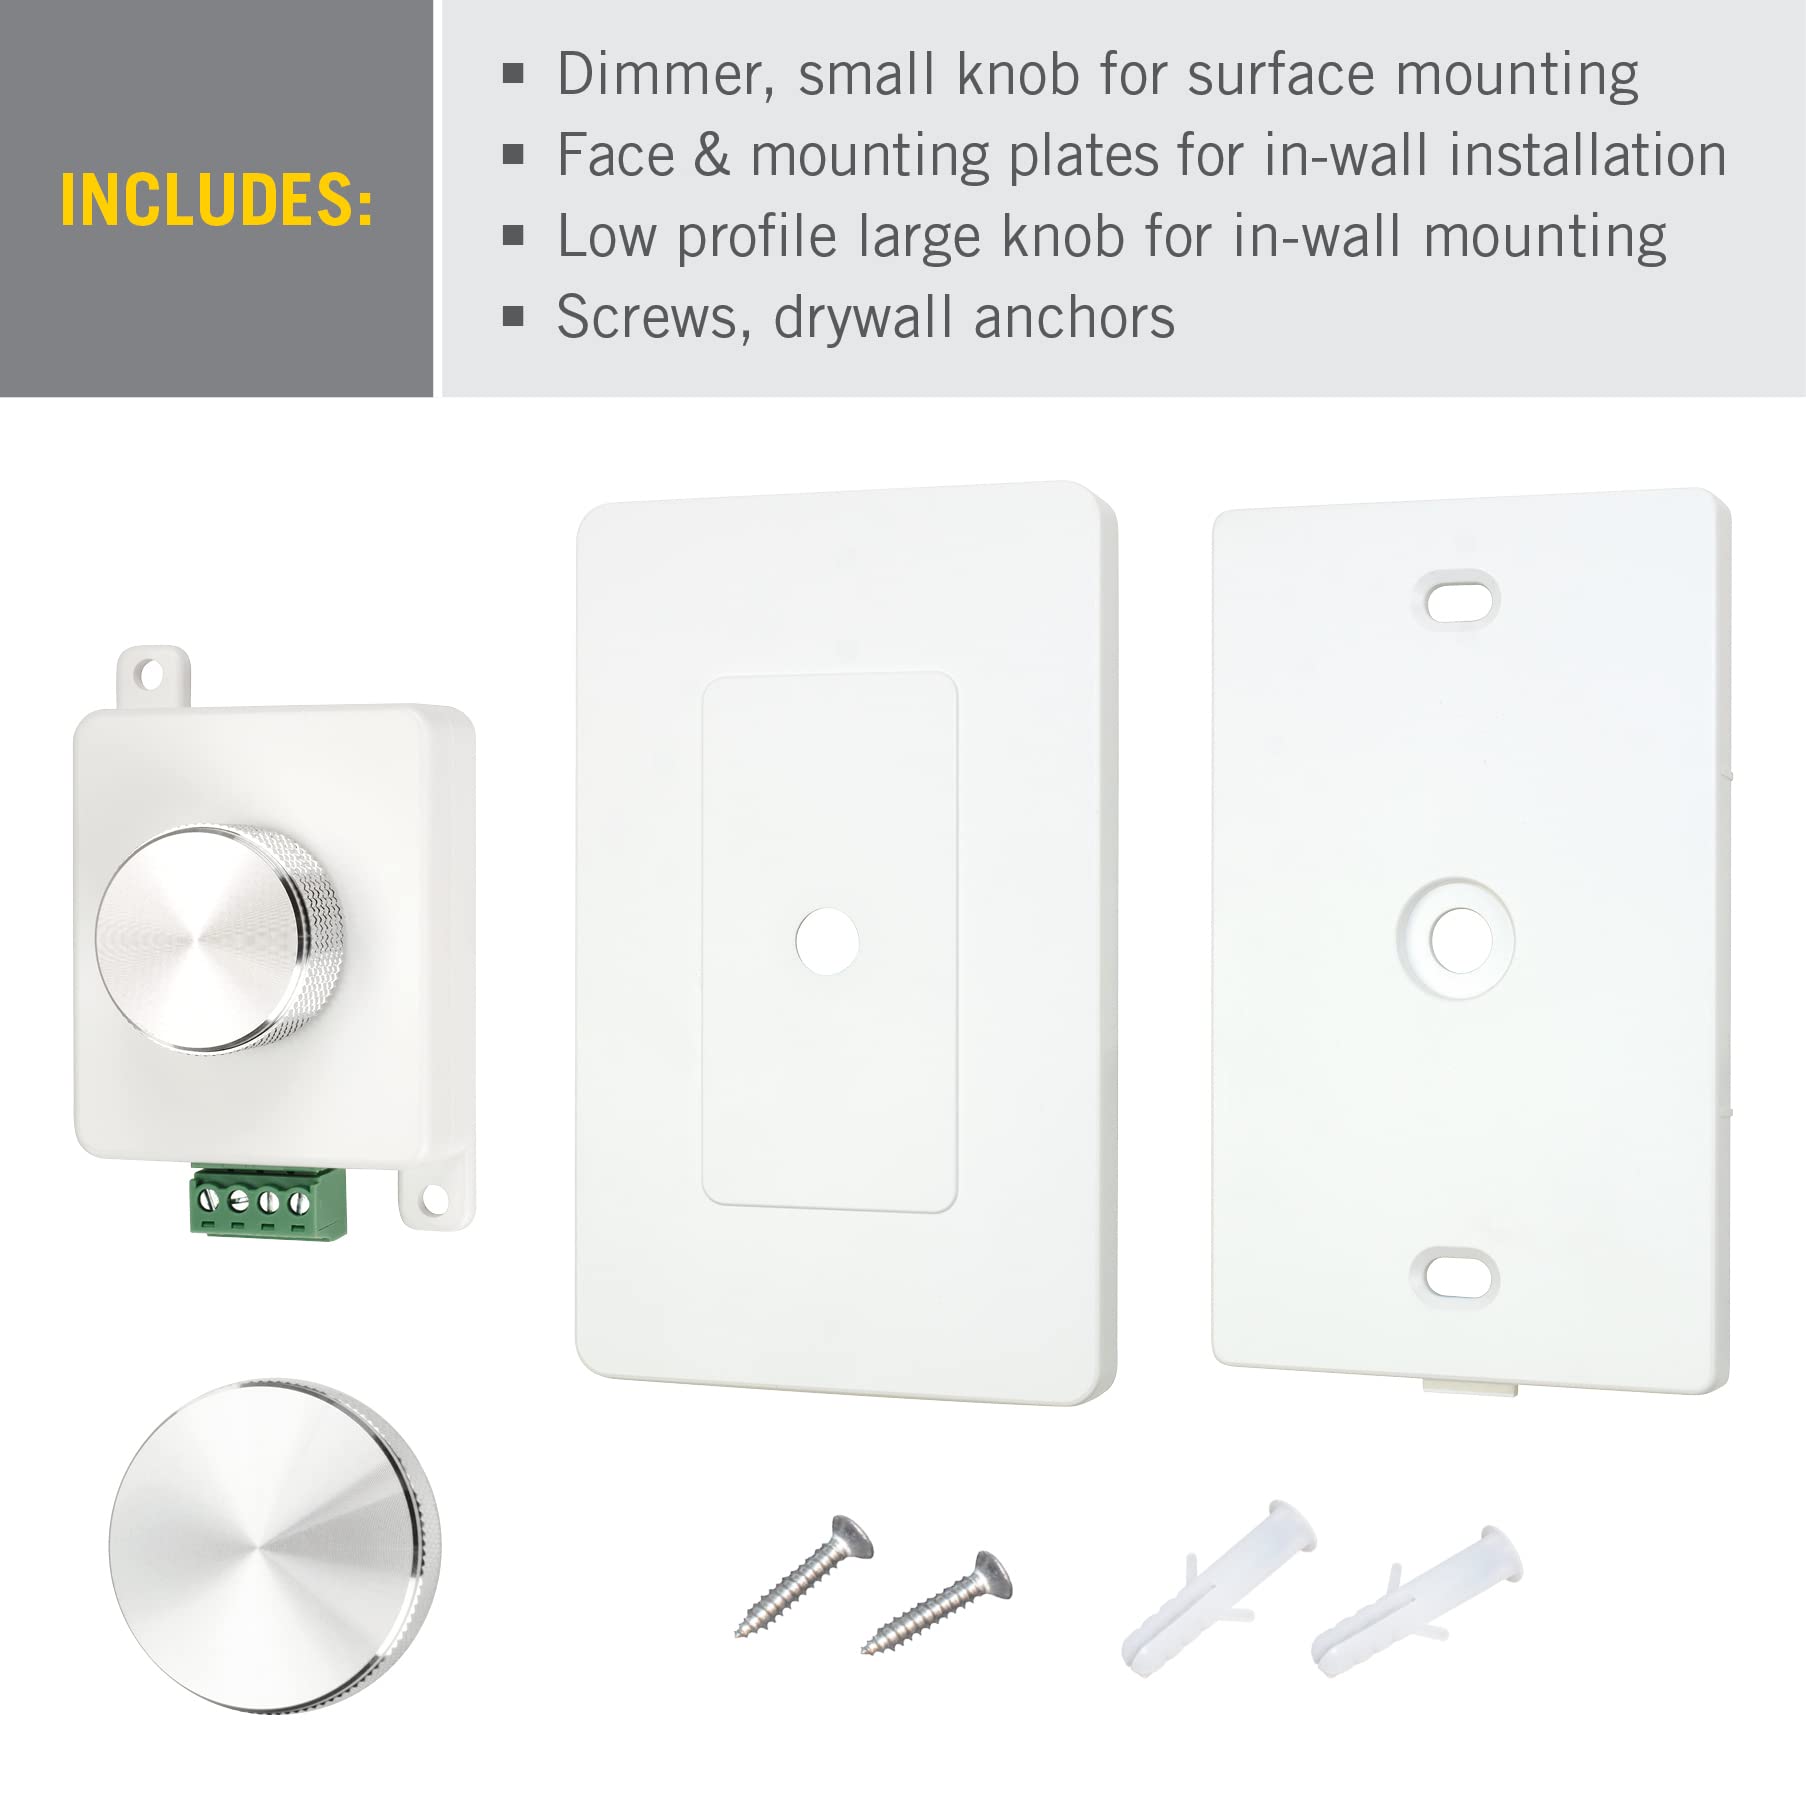 Armacost Lighting Proline Rotary Knob LED Dimmer 511129